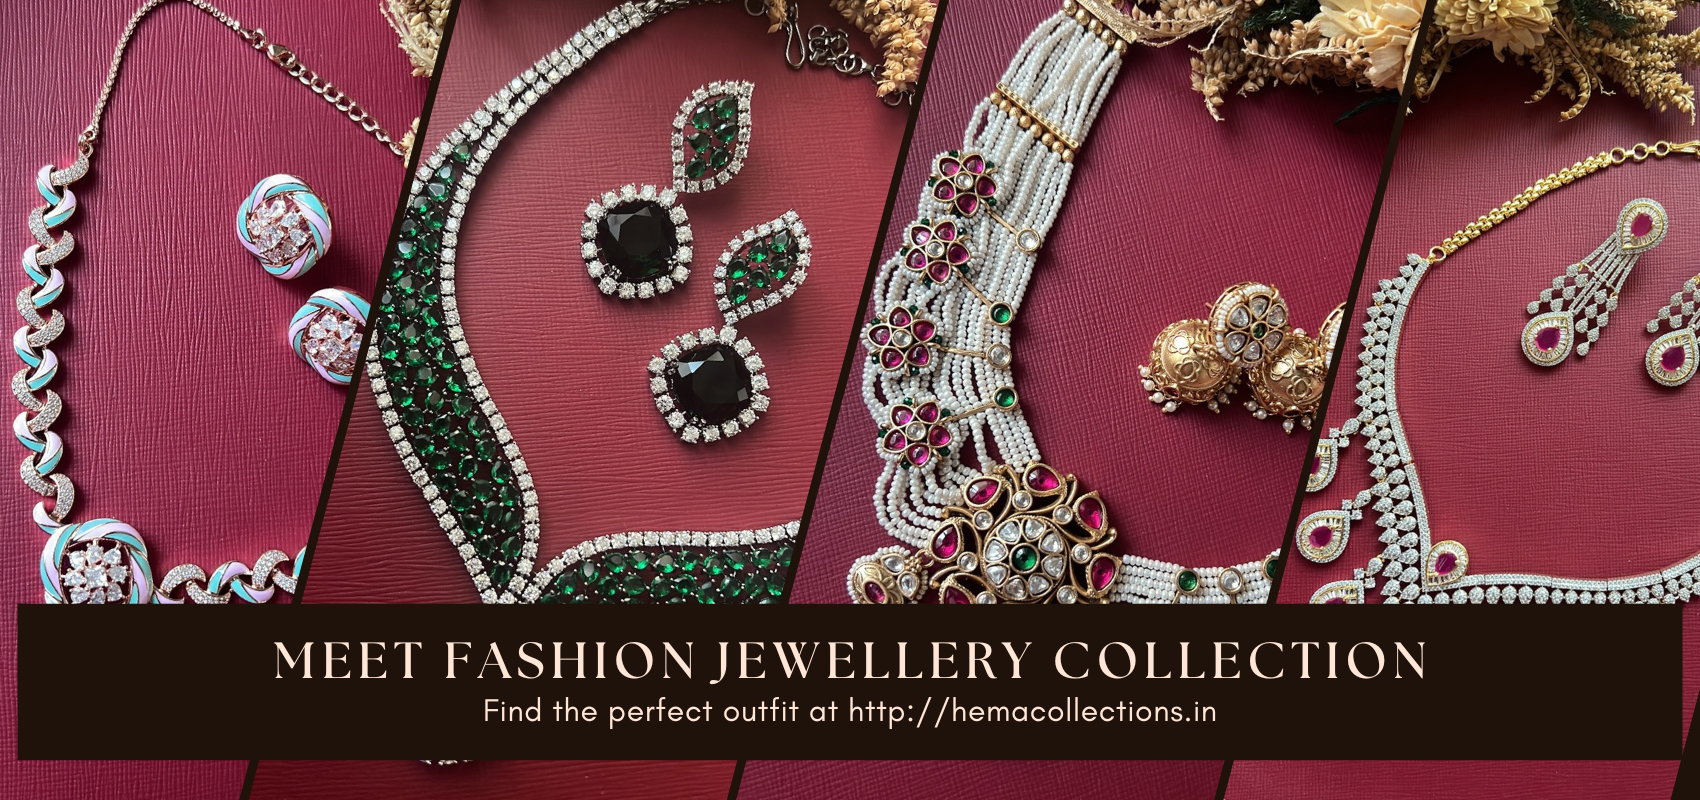 Meet Fashion Jewellery Collection